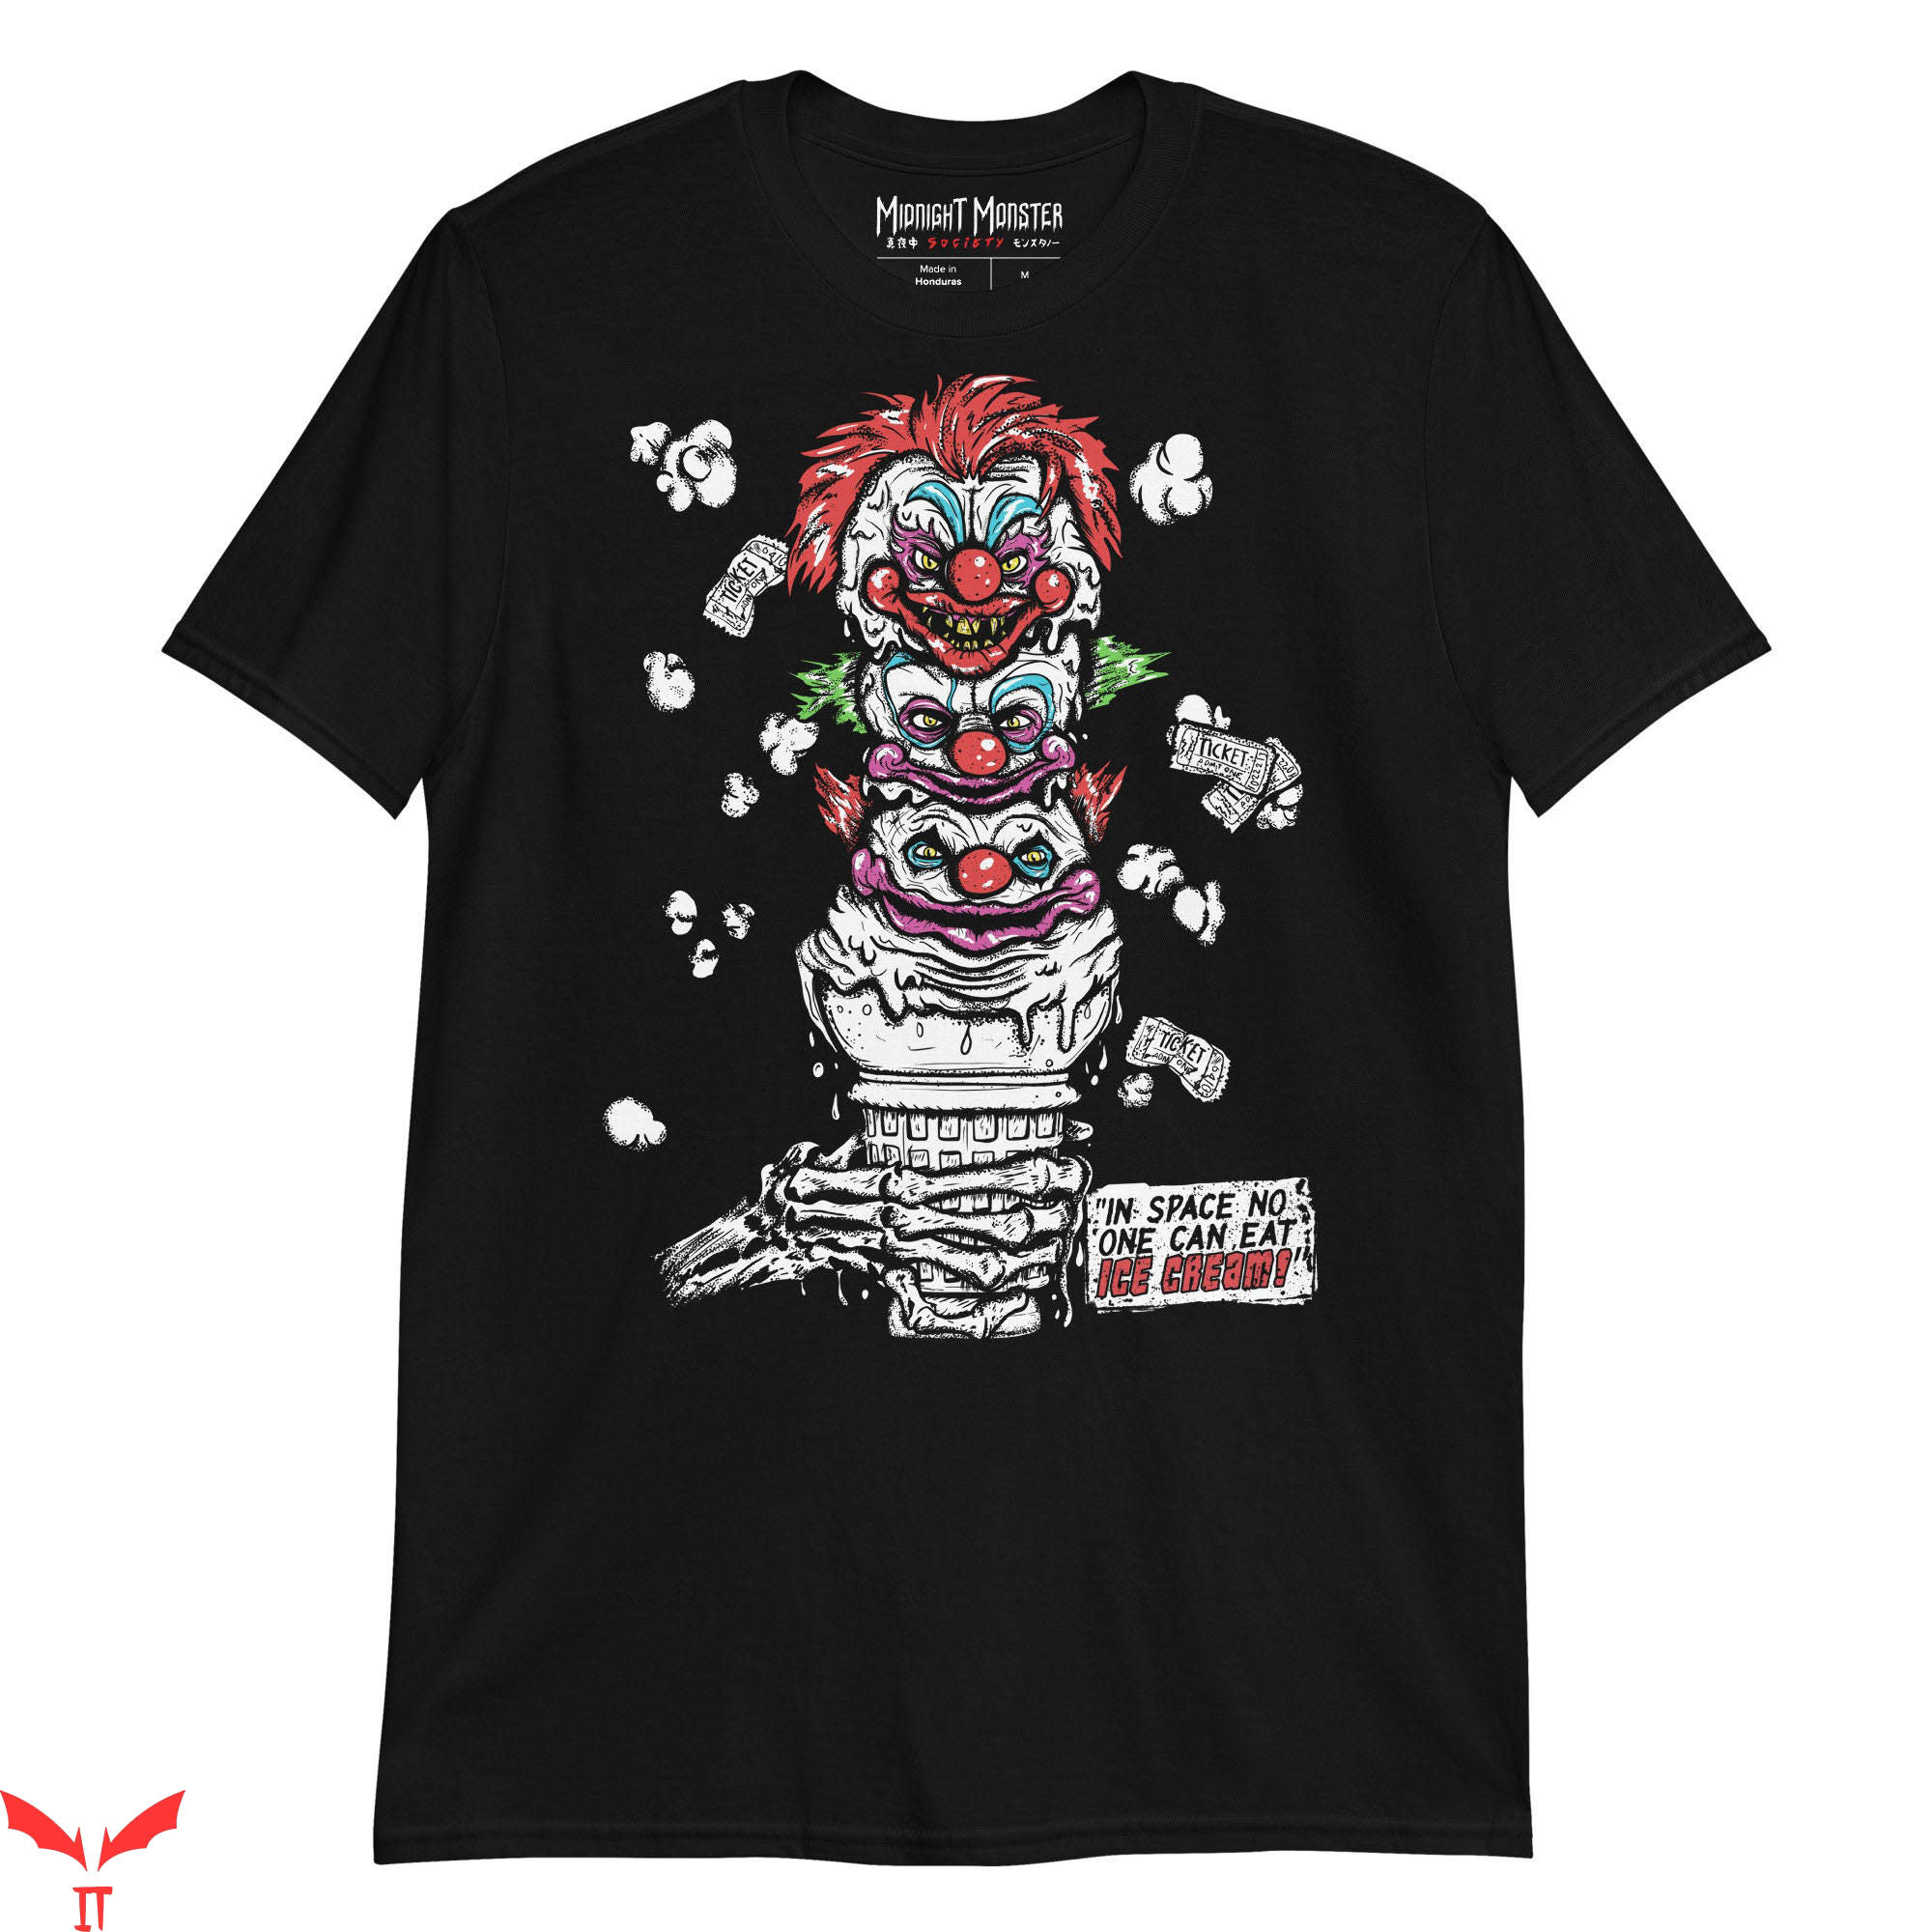 IT The Clown T-Shirt Killer Klowns From Outer Space Ice Cream